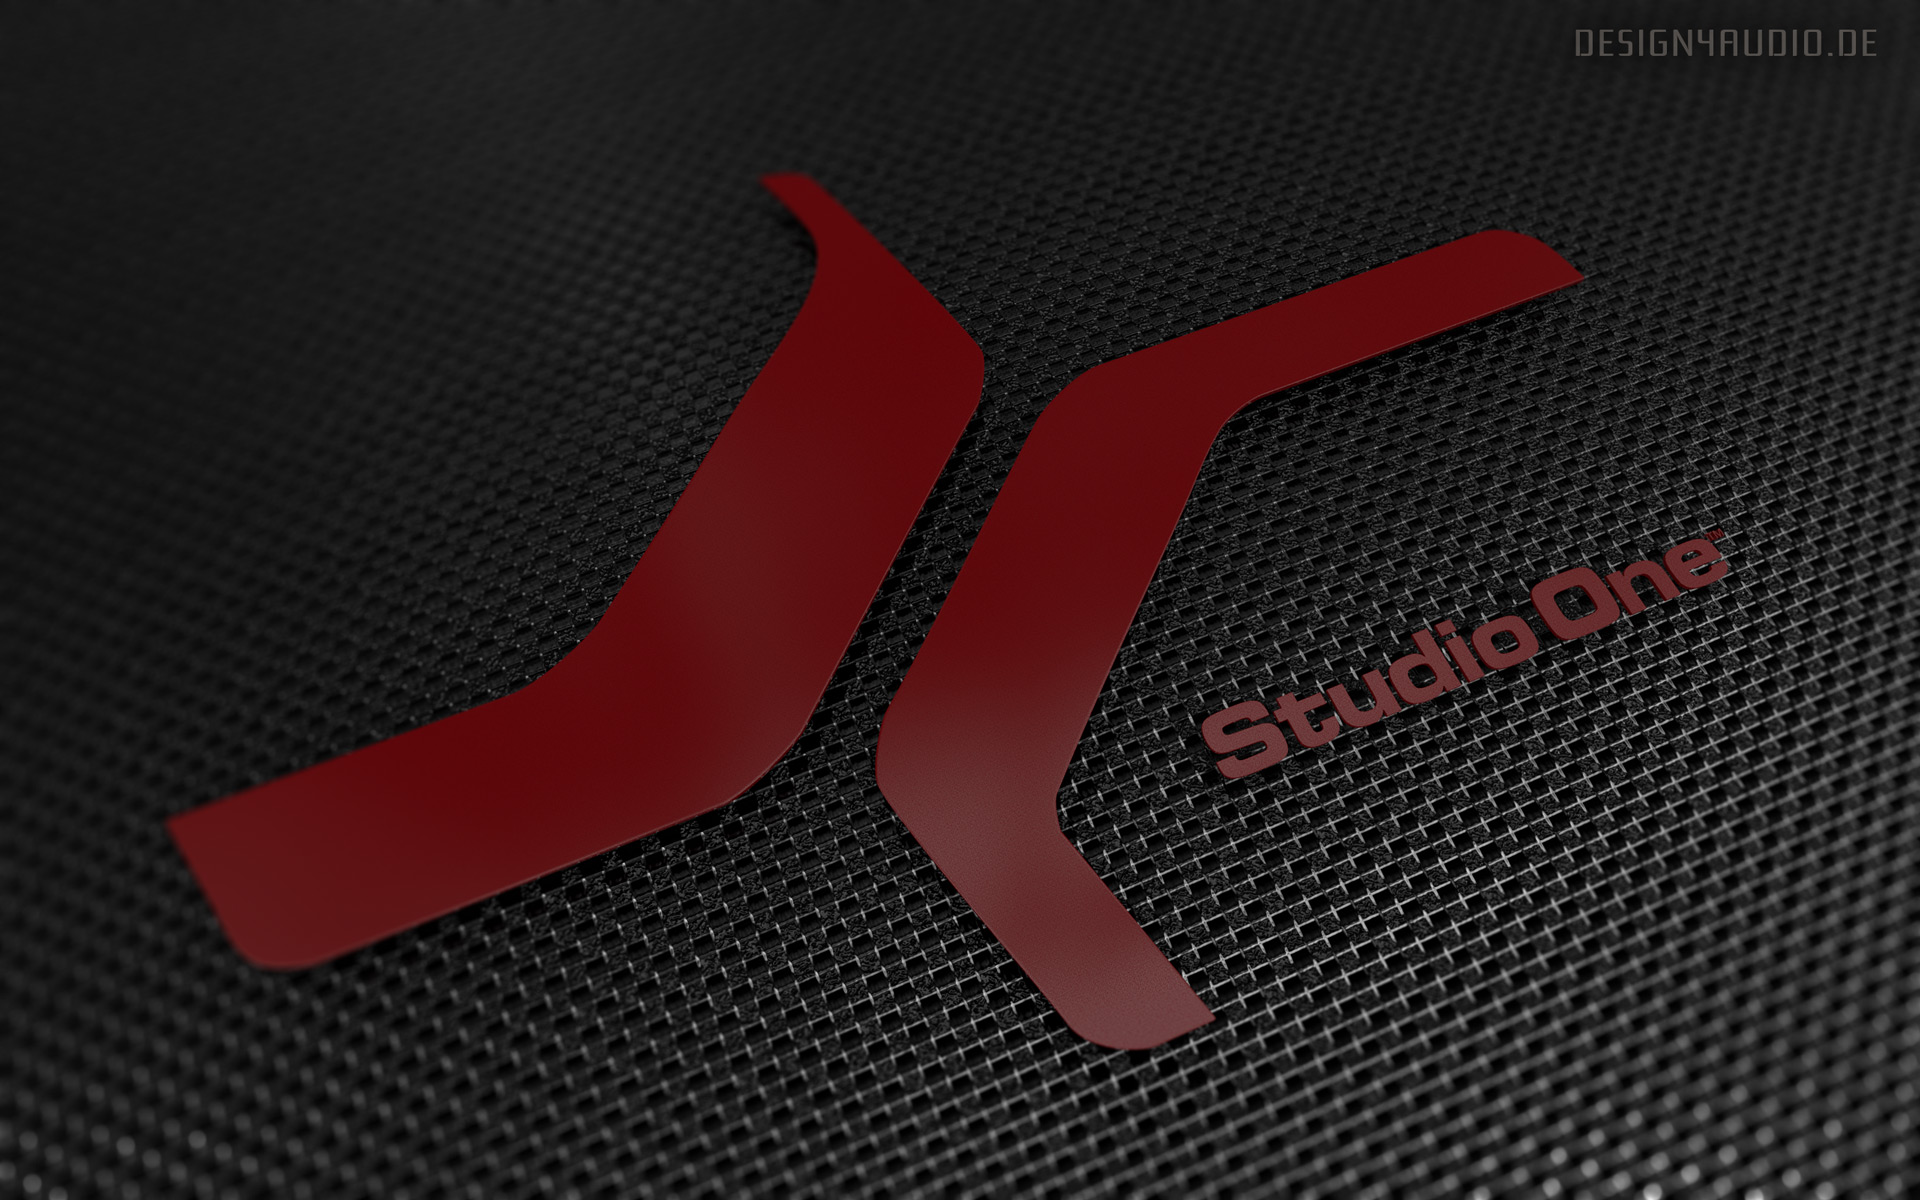 Studio One Version Unofficial Wallpaper Red On Carbon